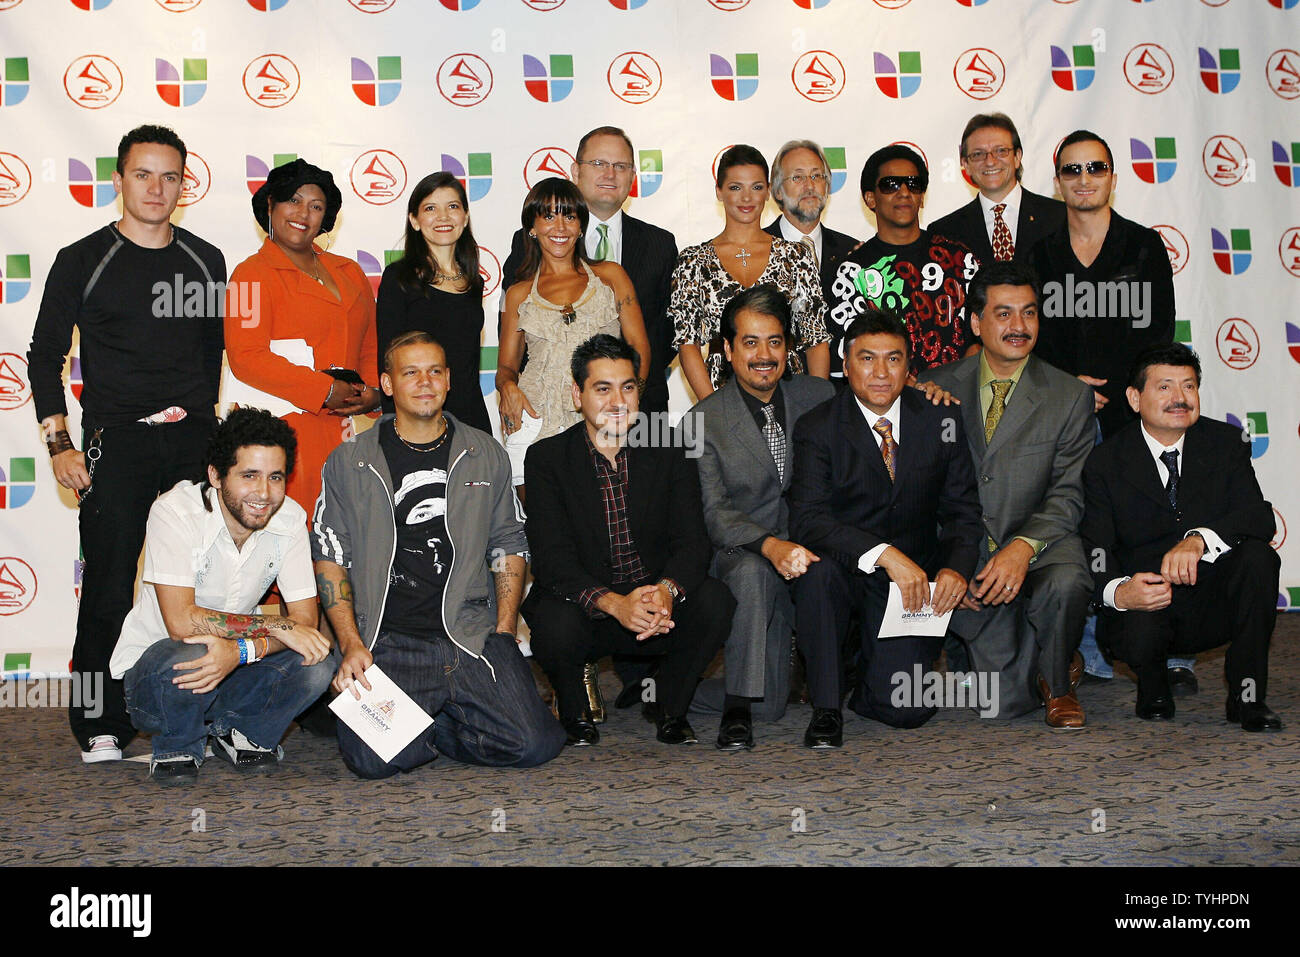 President of the Latin Recording Academy, Gabriel Abaroa, Barbara Bermudo, Obie Bermudez, Tego Calderon, Calle 13, Willie Colon, Fonseca, Alejandra Guzman, India, and Los Tigres Del Norte get together for a picture during the 7th annual Latin Grammy Awards nominee press conference at Madison Square Garden in New York City on September 26, 2006.    (UPI Photo/John Angelillo) Stock Photo